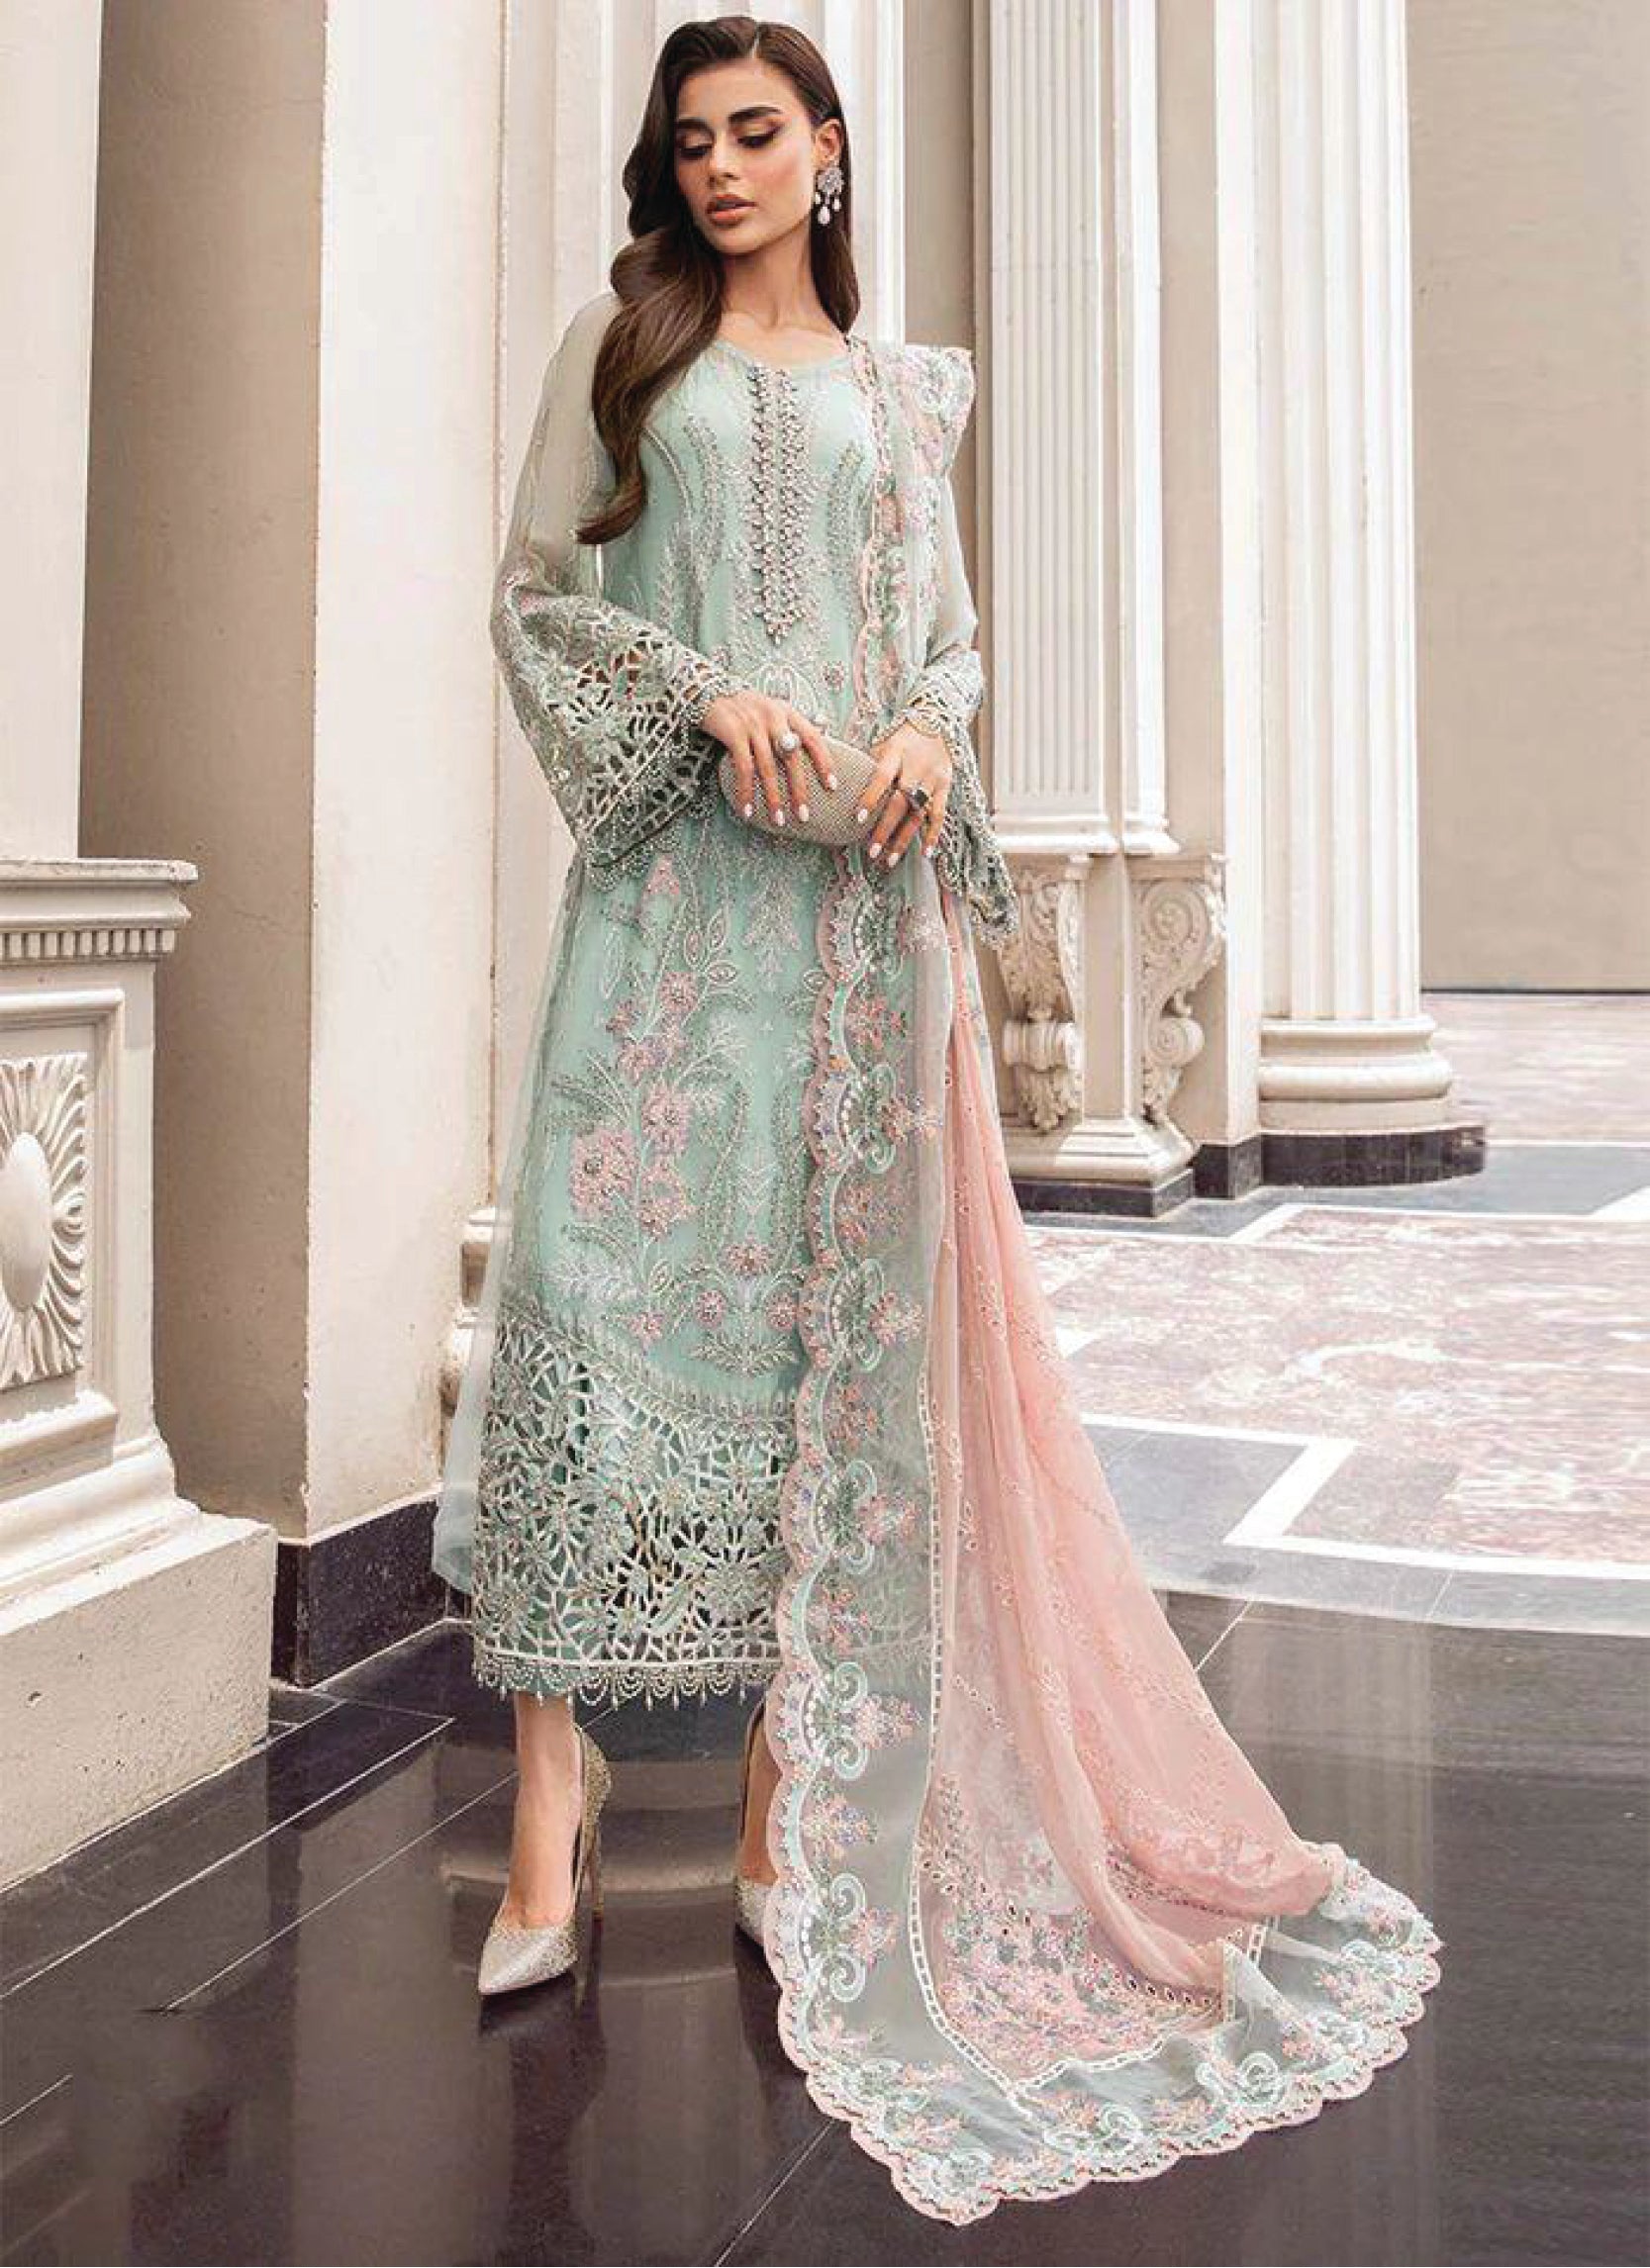 MB EMBROIDED CHIFFON UN-STITCHED 3-PIECE SUIT-FORMAL WEAR - Malabis